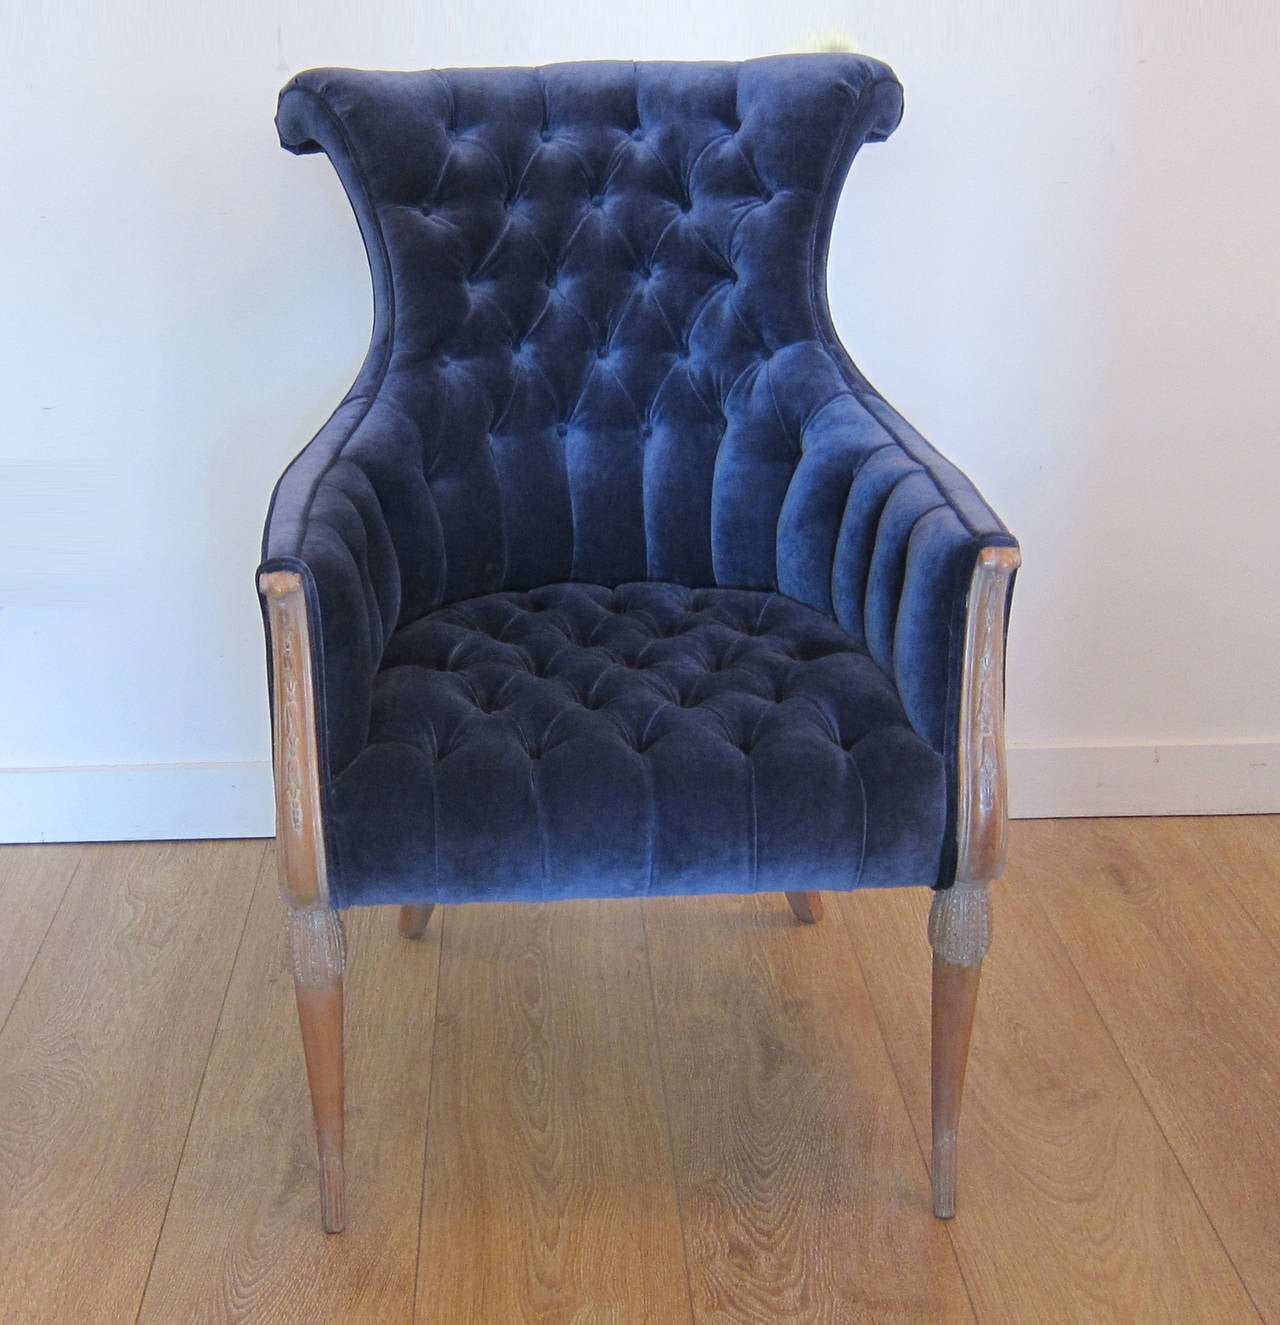 Pair of re scroll back armchairs or bergeres by Grosfeld House. Newly upholstered with blue velvet fabric and washed sycamore wood patina.